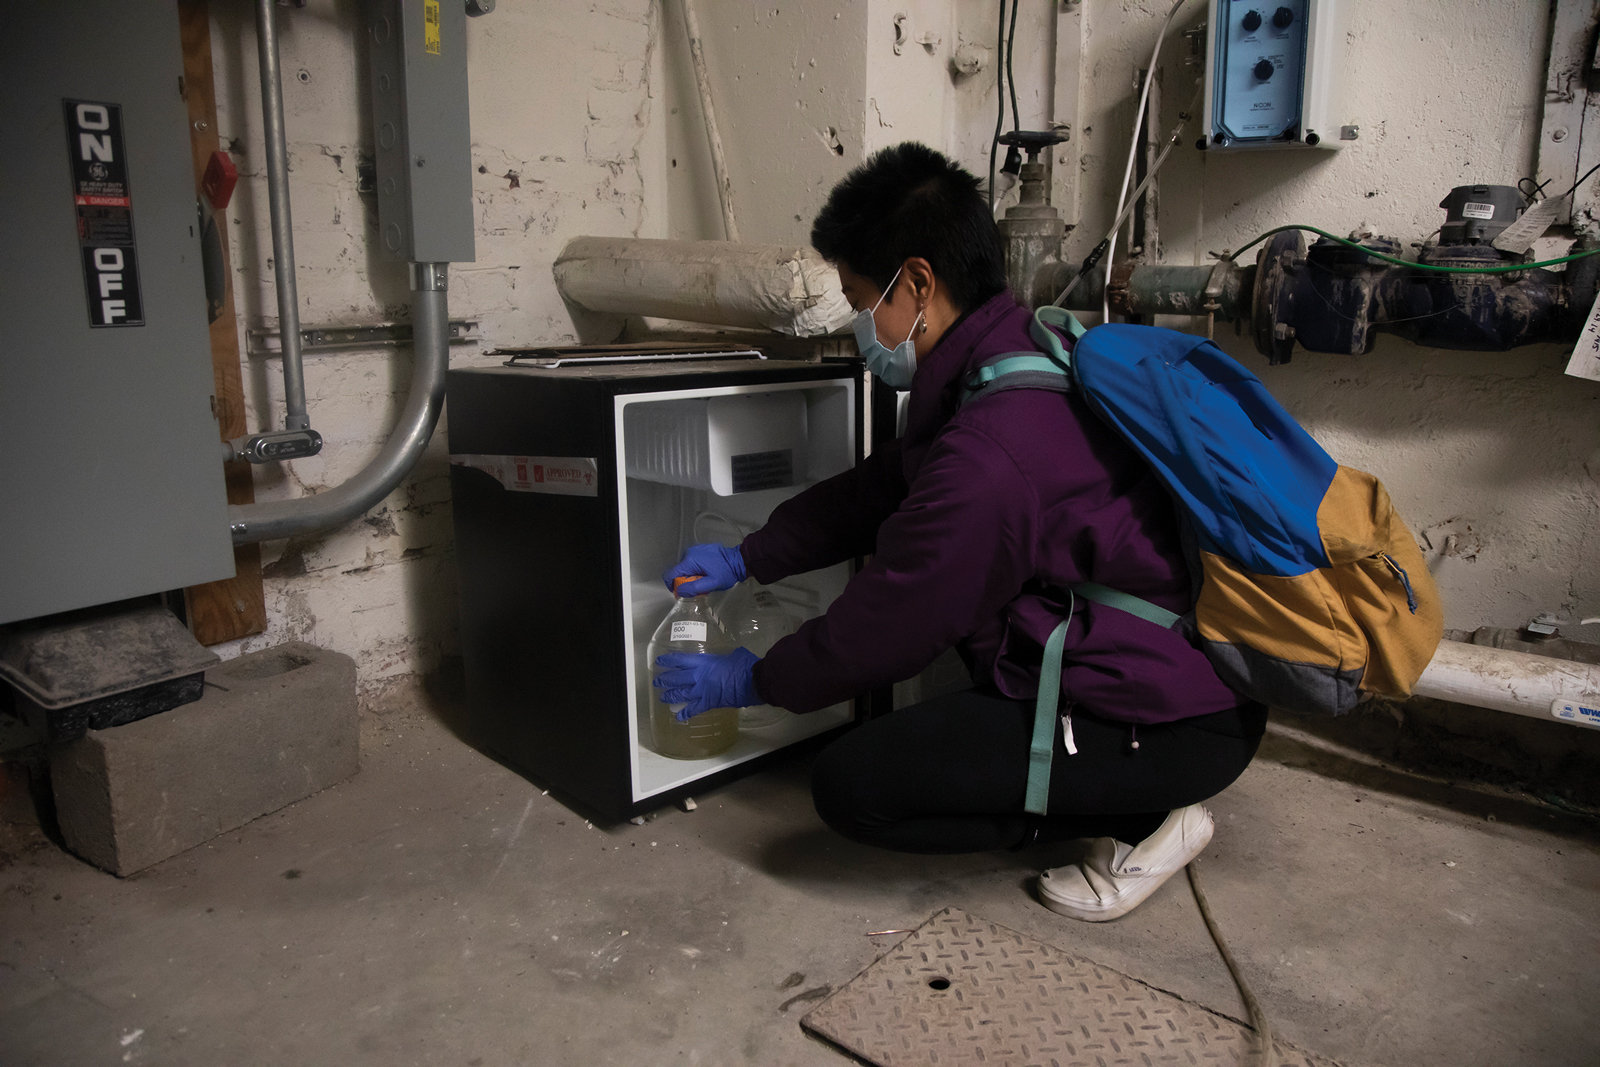 Janet Vo ’22 removes a sample bottle from the refrigerator to bring for analysis and adds a new sterile bottle to prepare for the next sample.